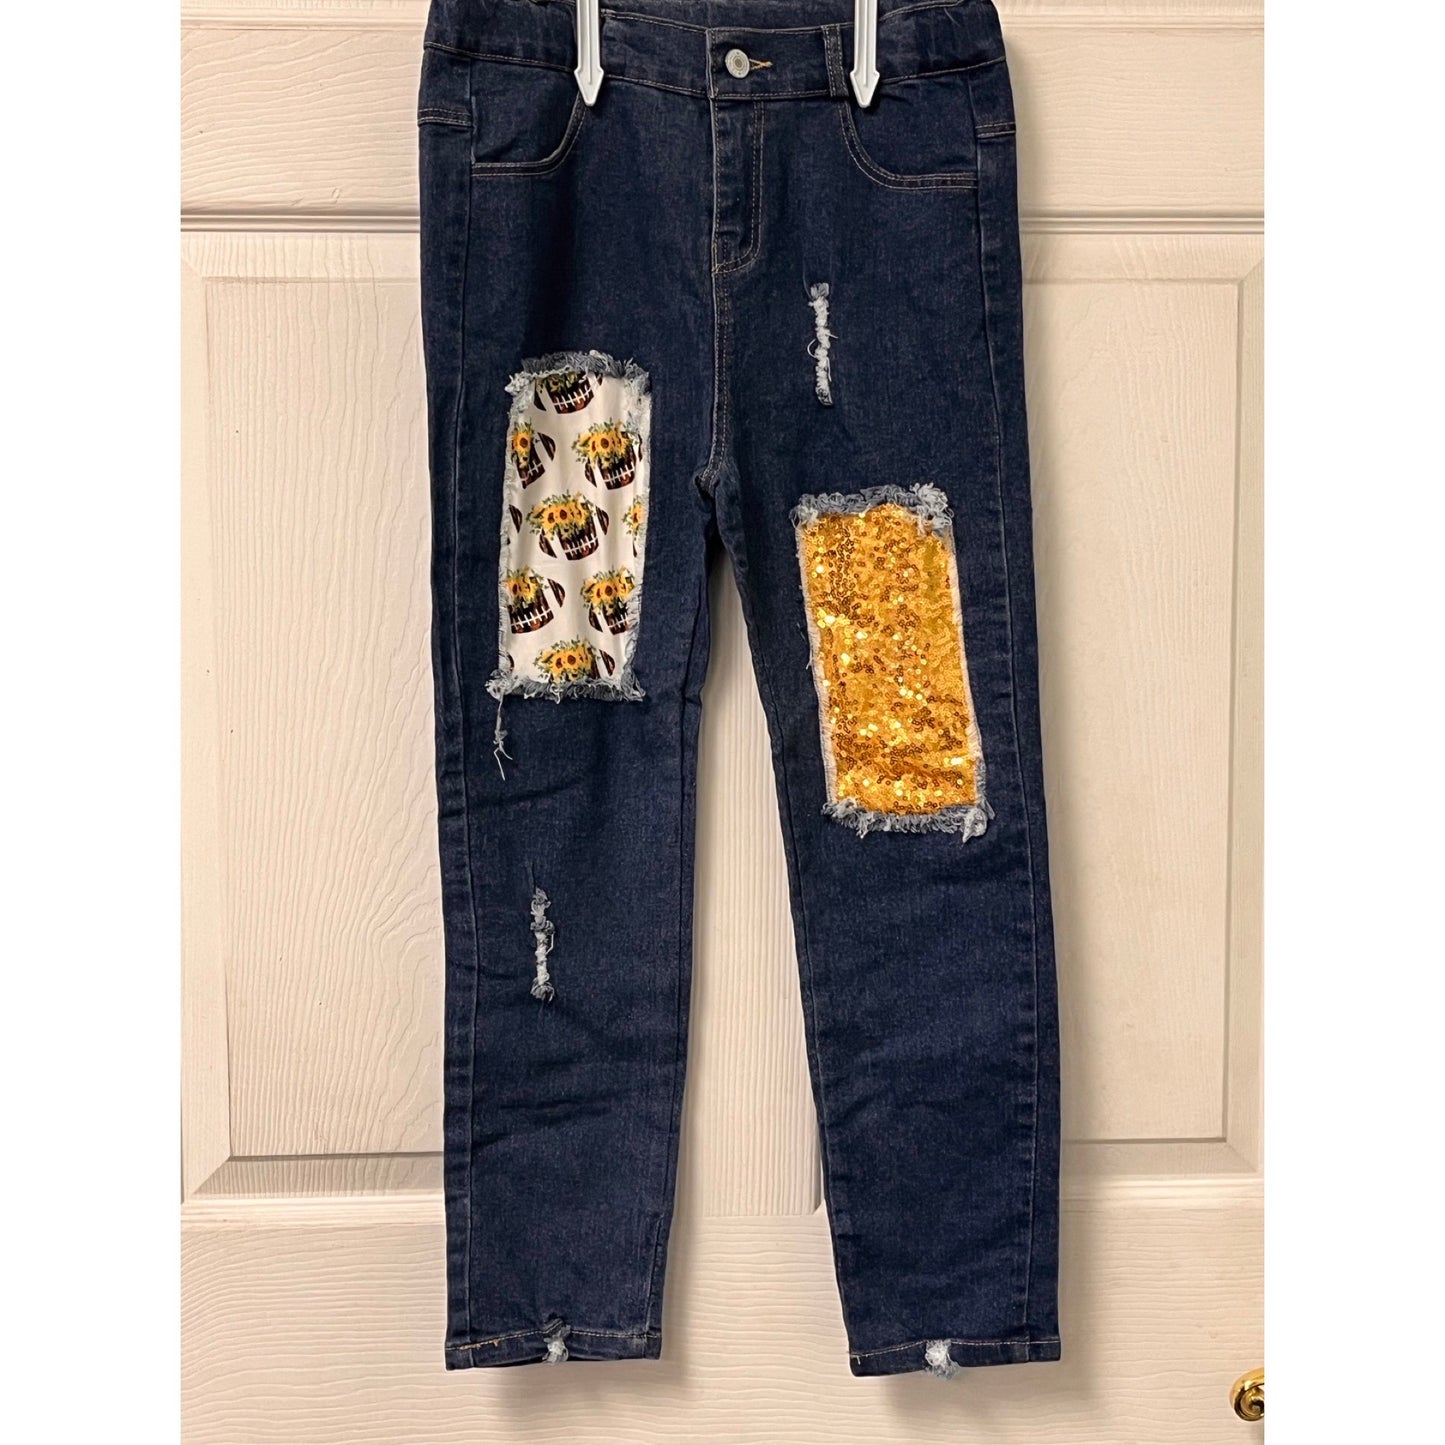 10-12 (4XL) Sequin and Football Jeans